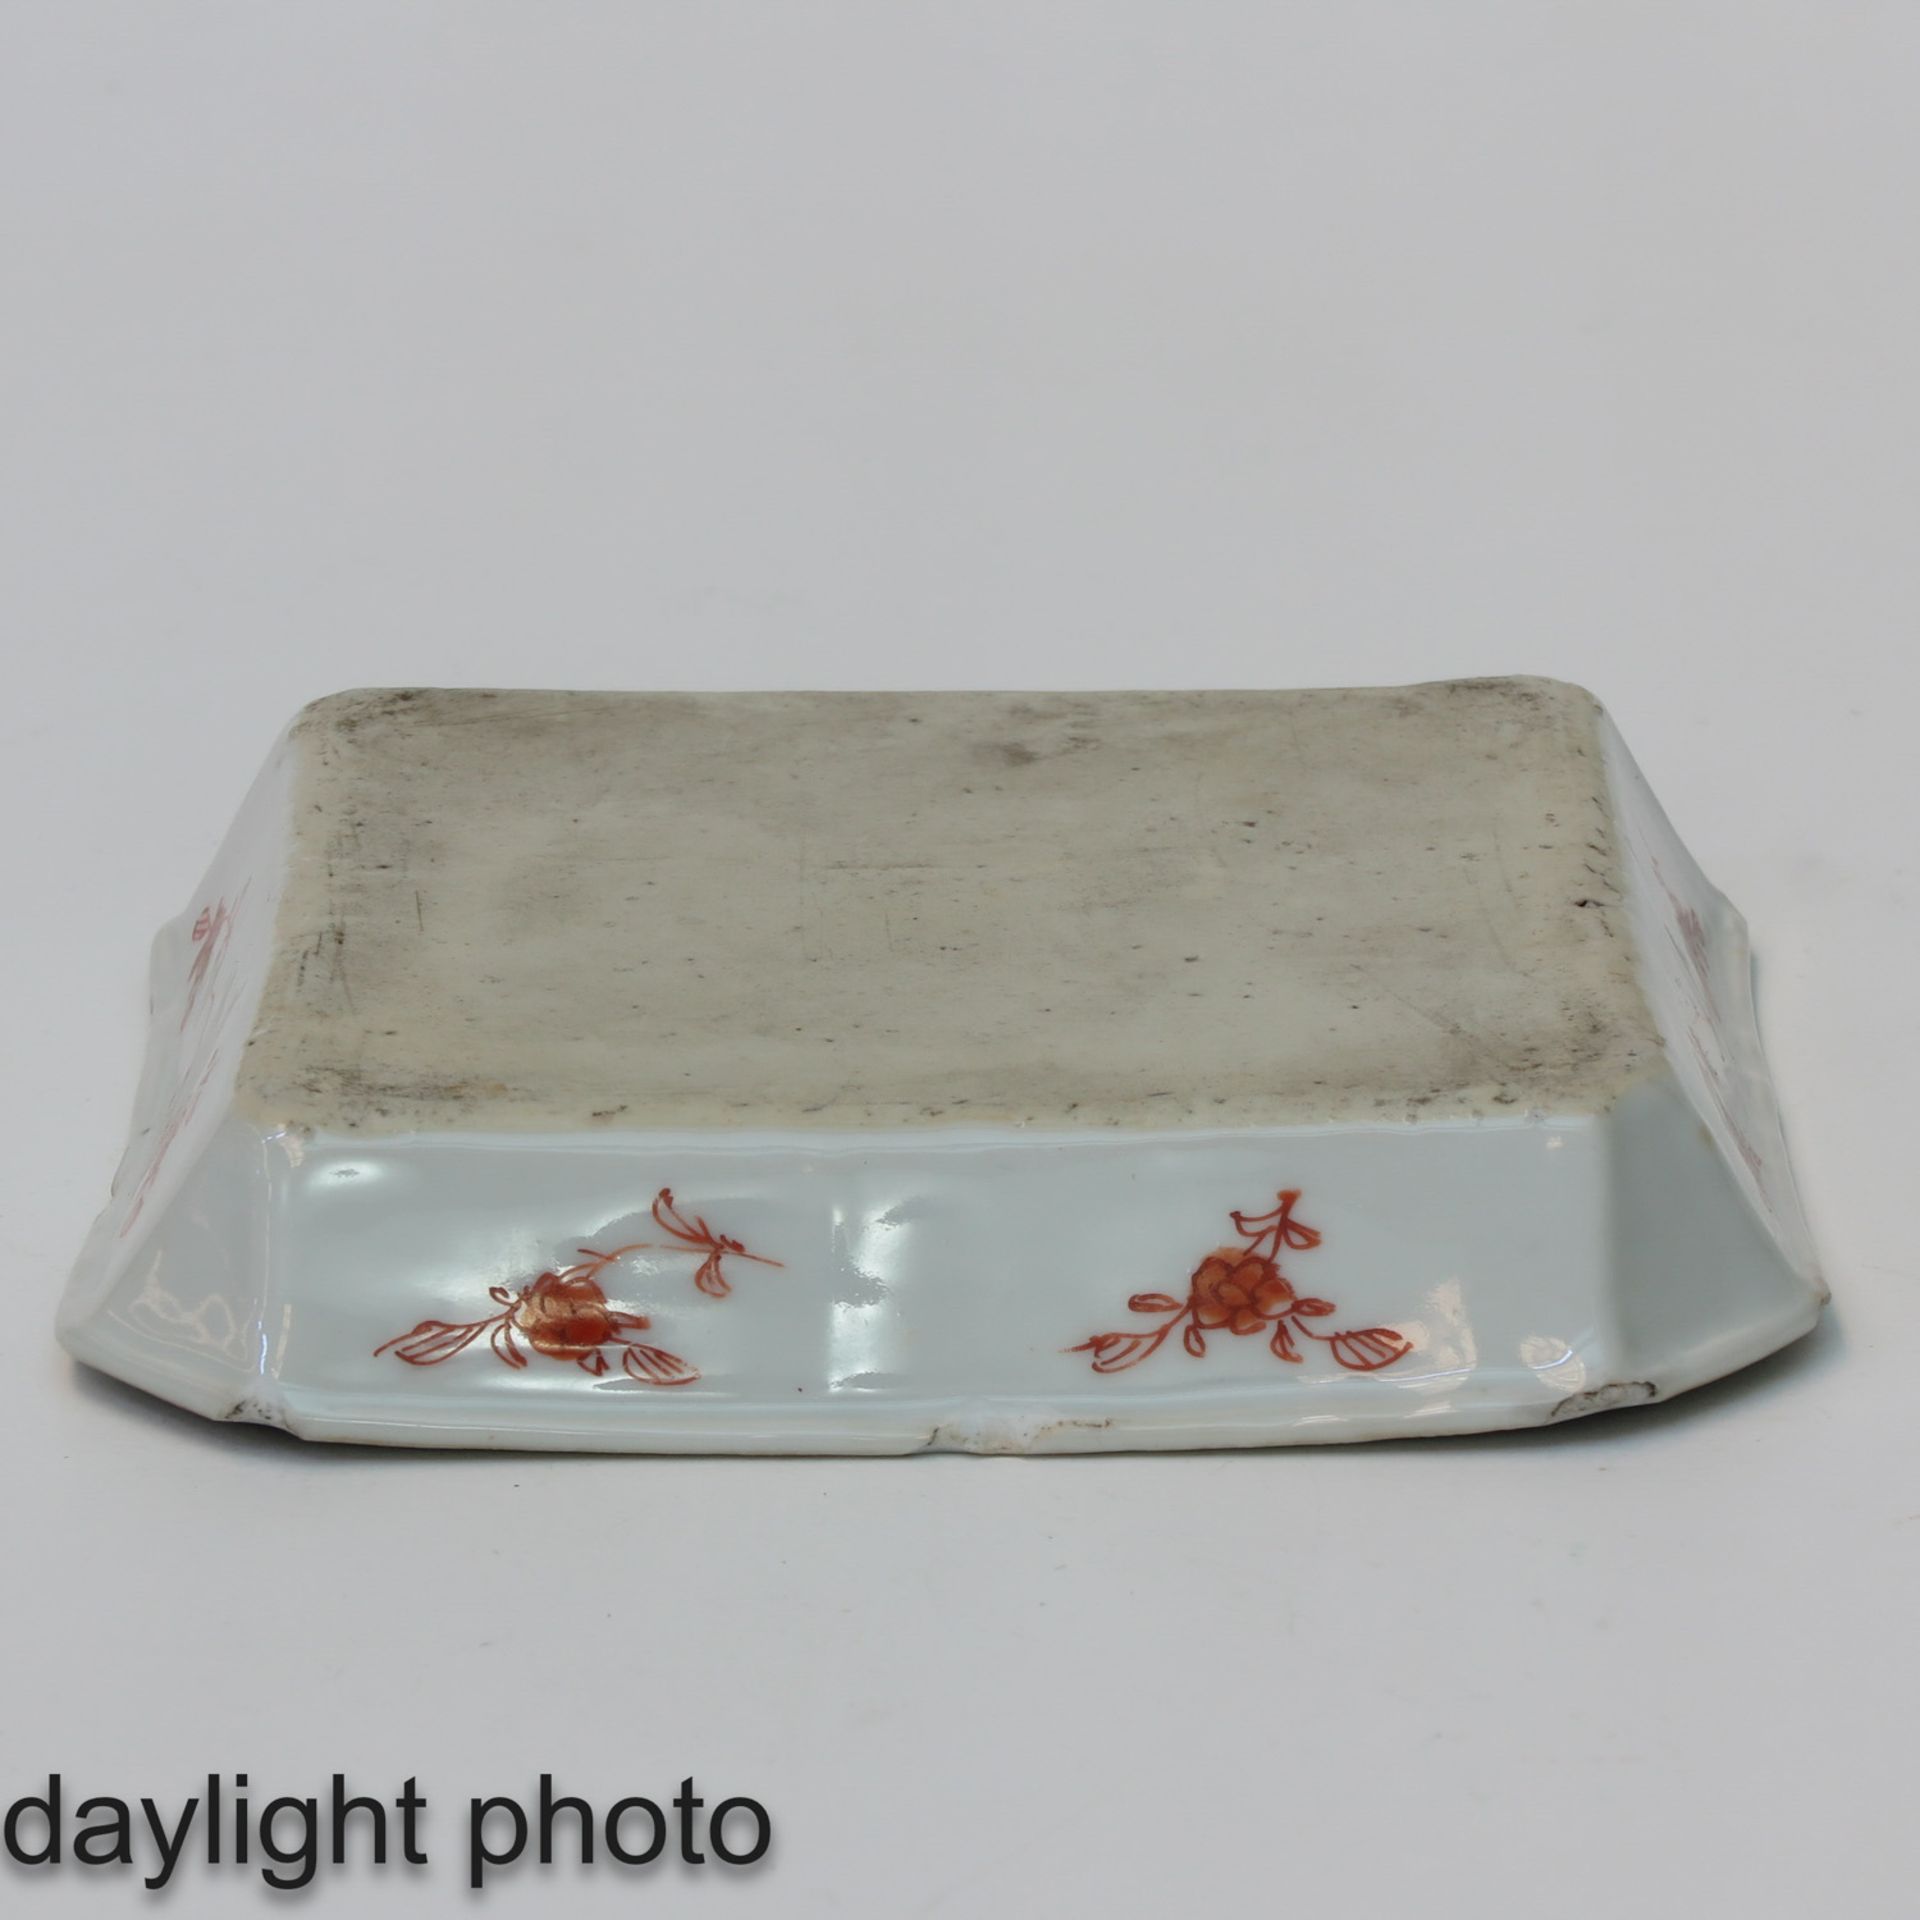 A Small Milk and Blood Tray - Image 4 of 5